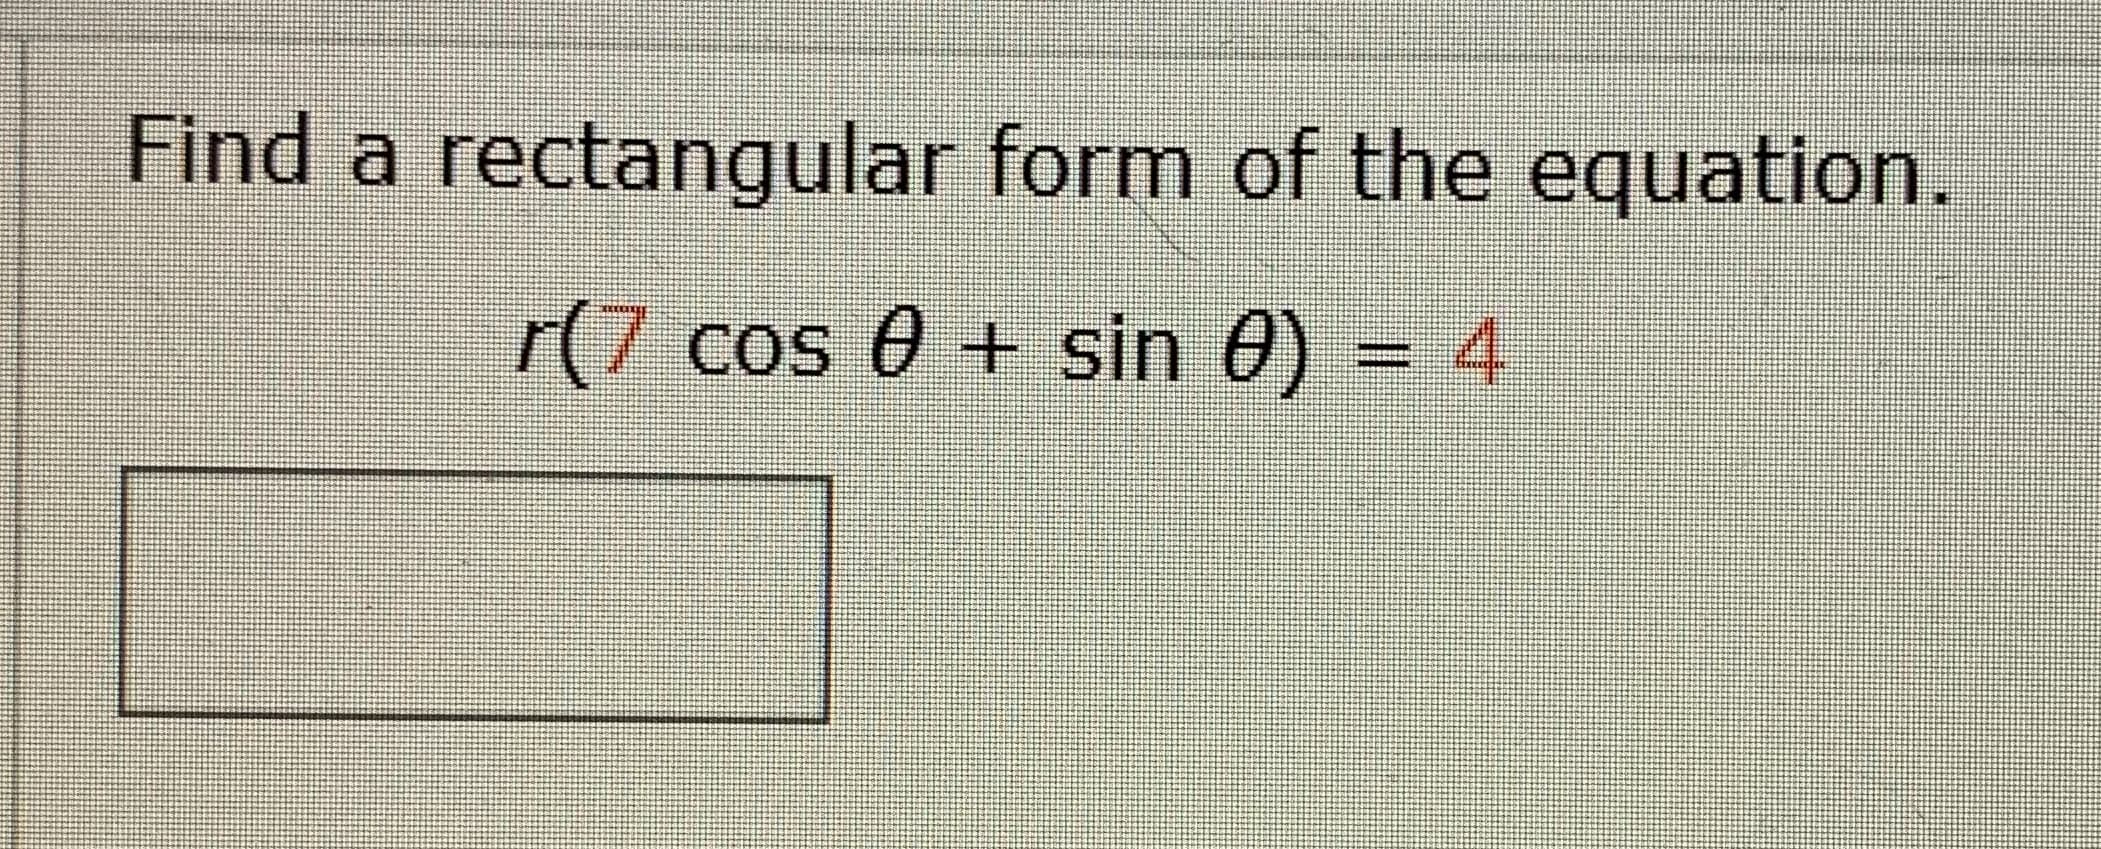 Find a rectangular form of the equation.
r(7 cos 0 + sin 0) = 4
